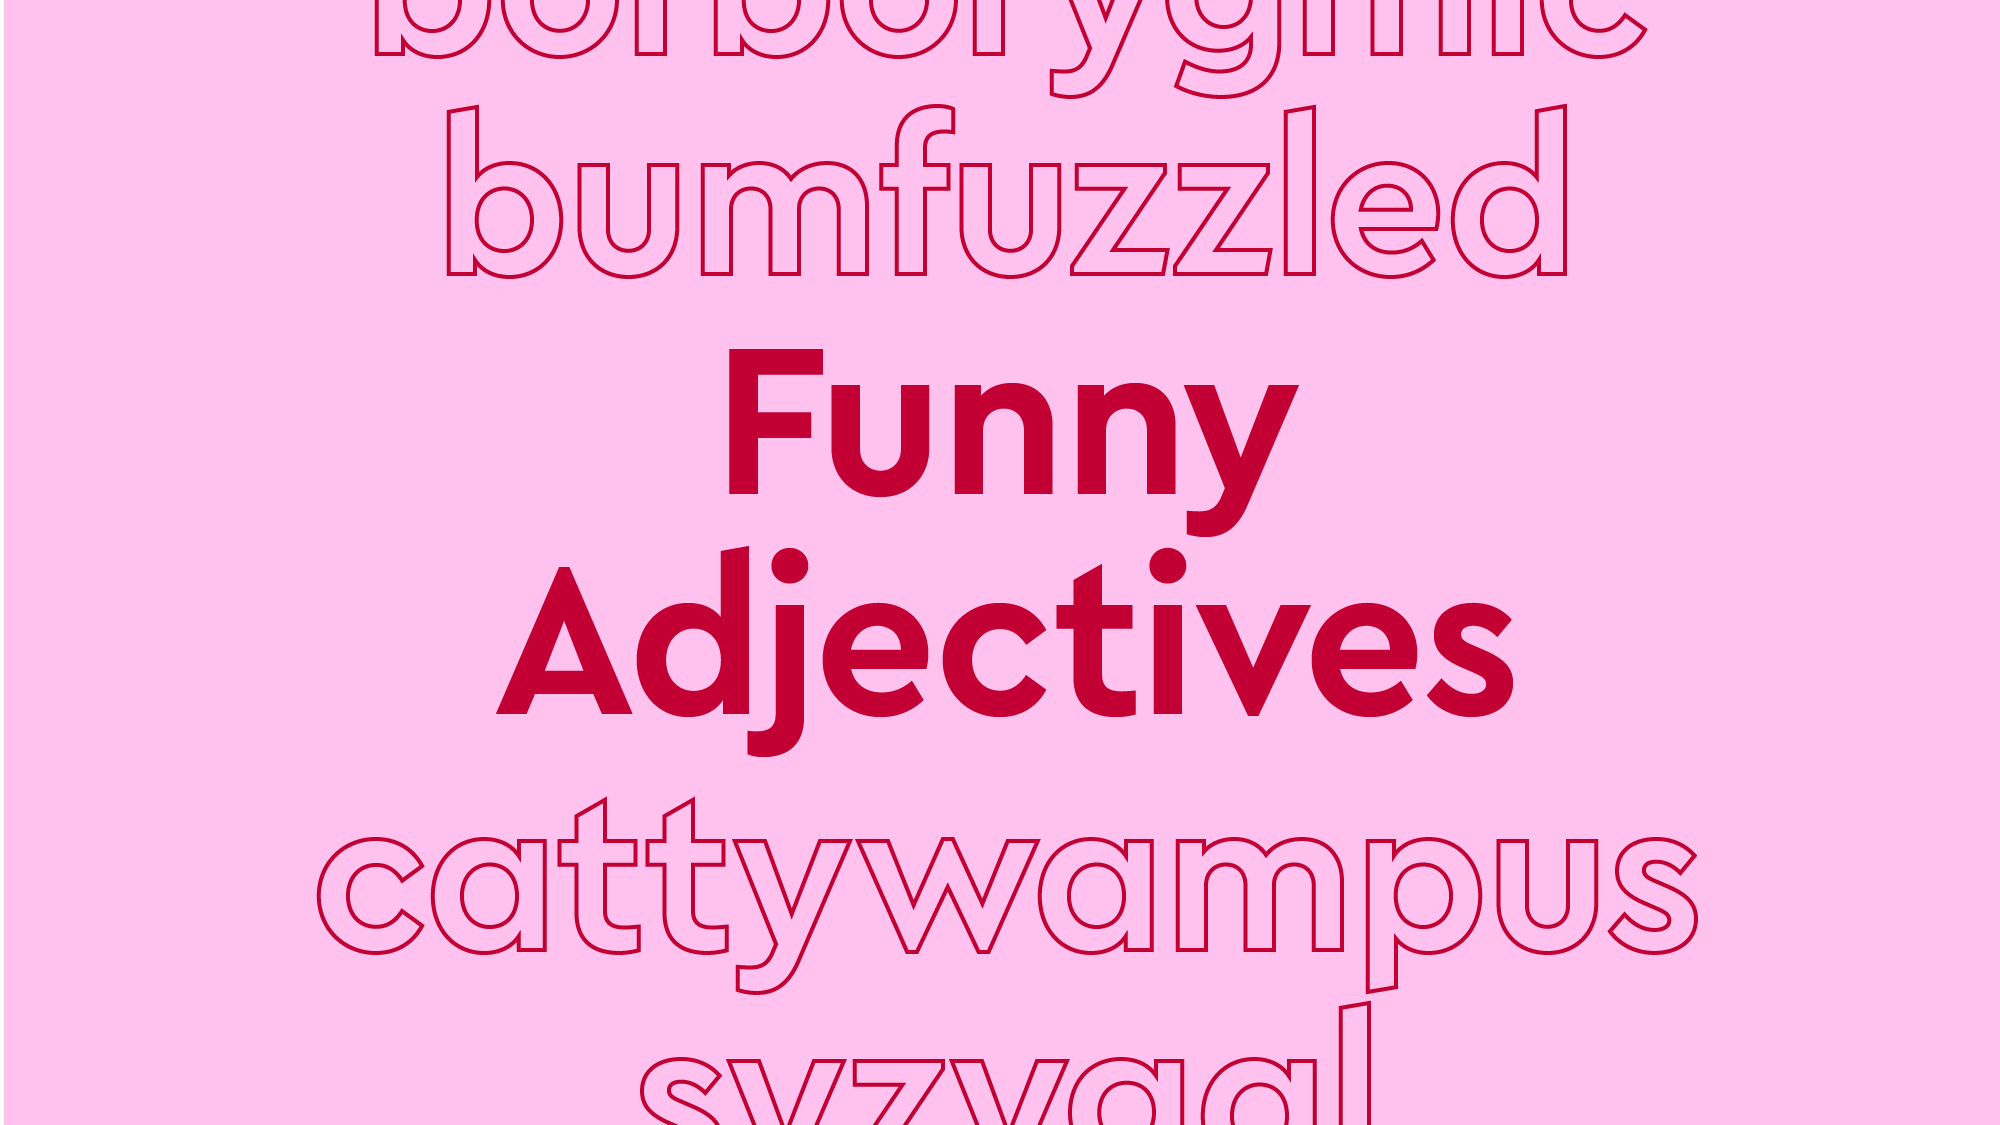 Get Giggly With It: 17 Funny Adjectives To Make You Laugh